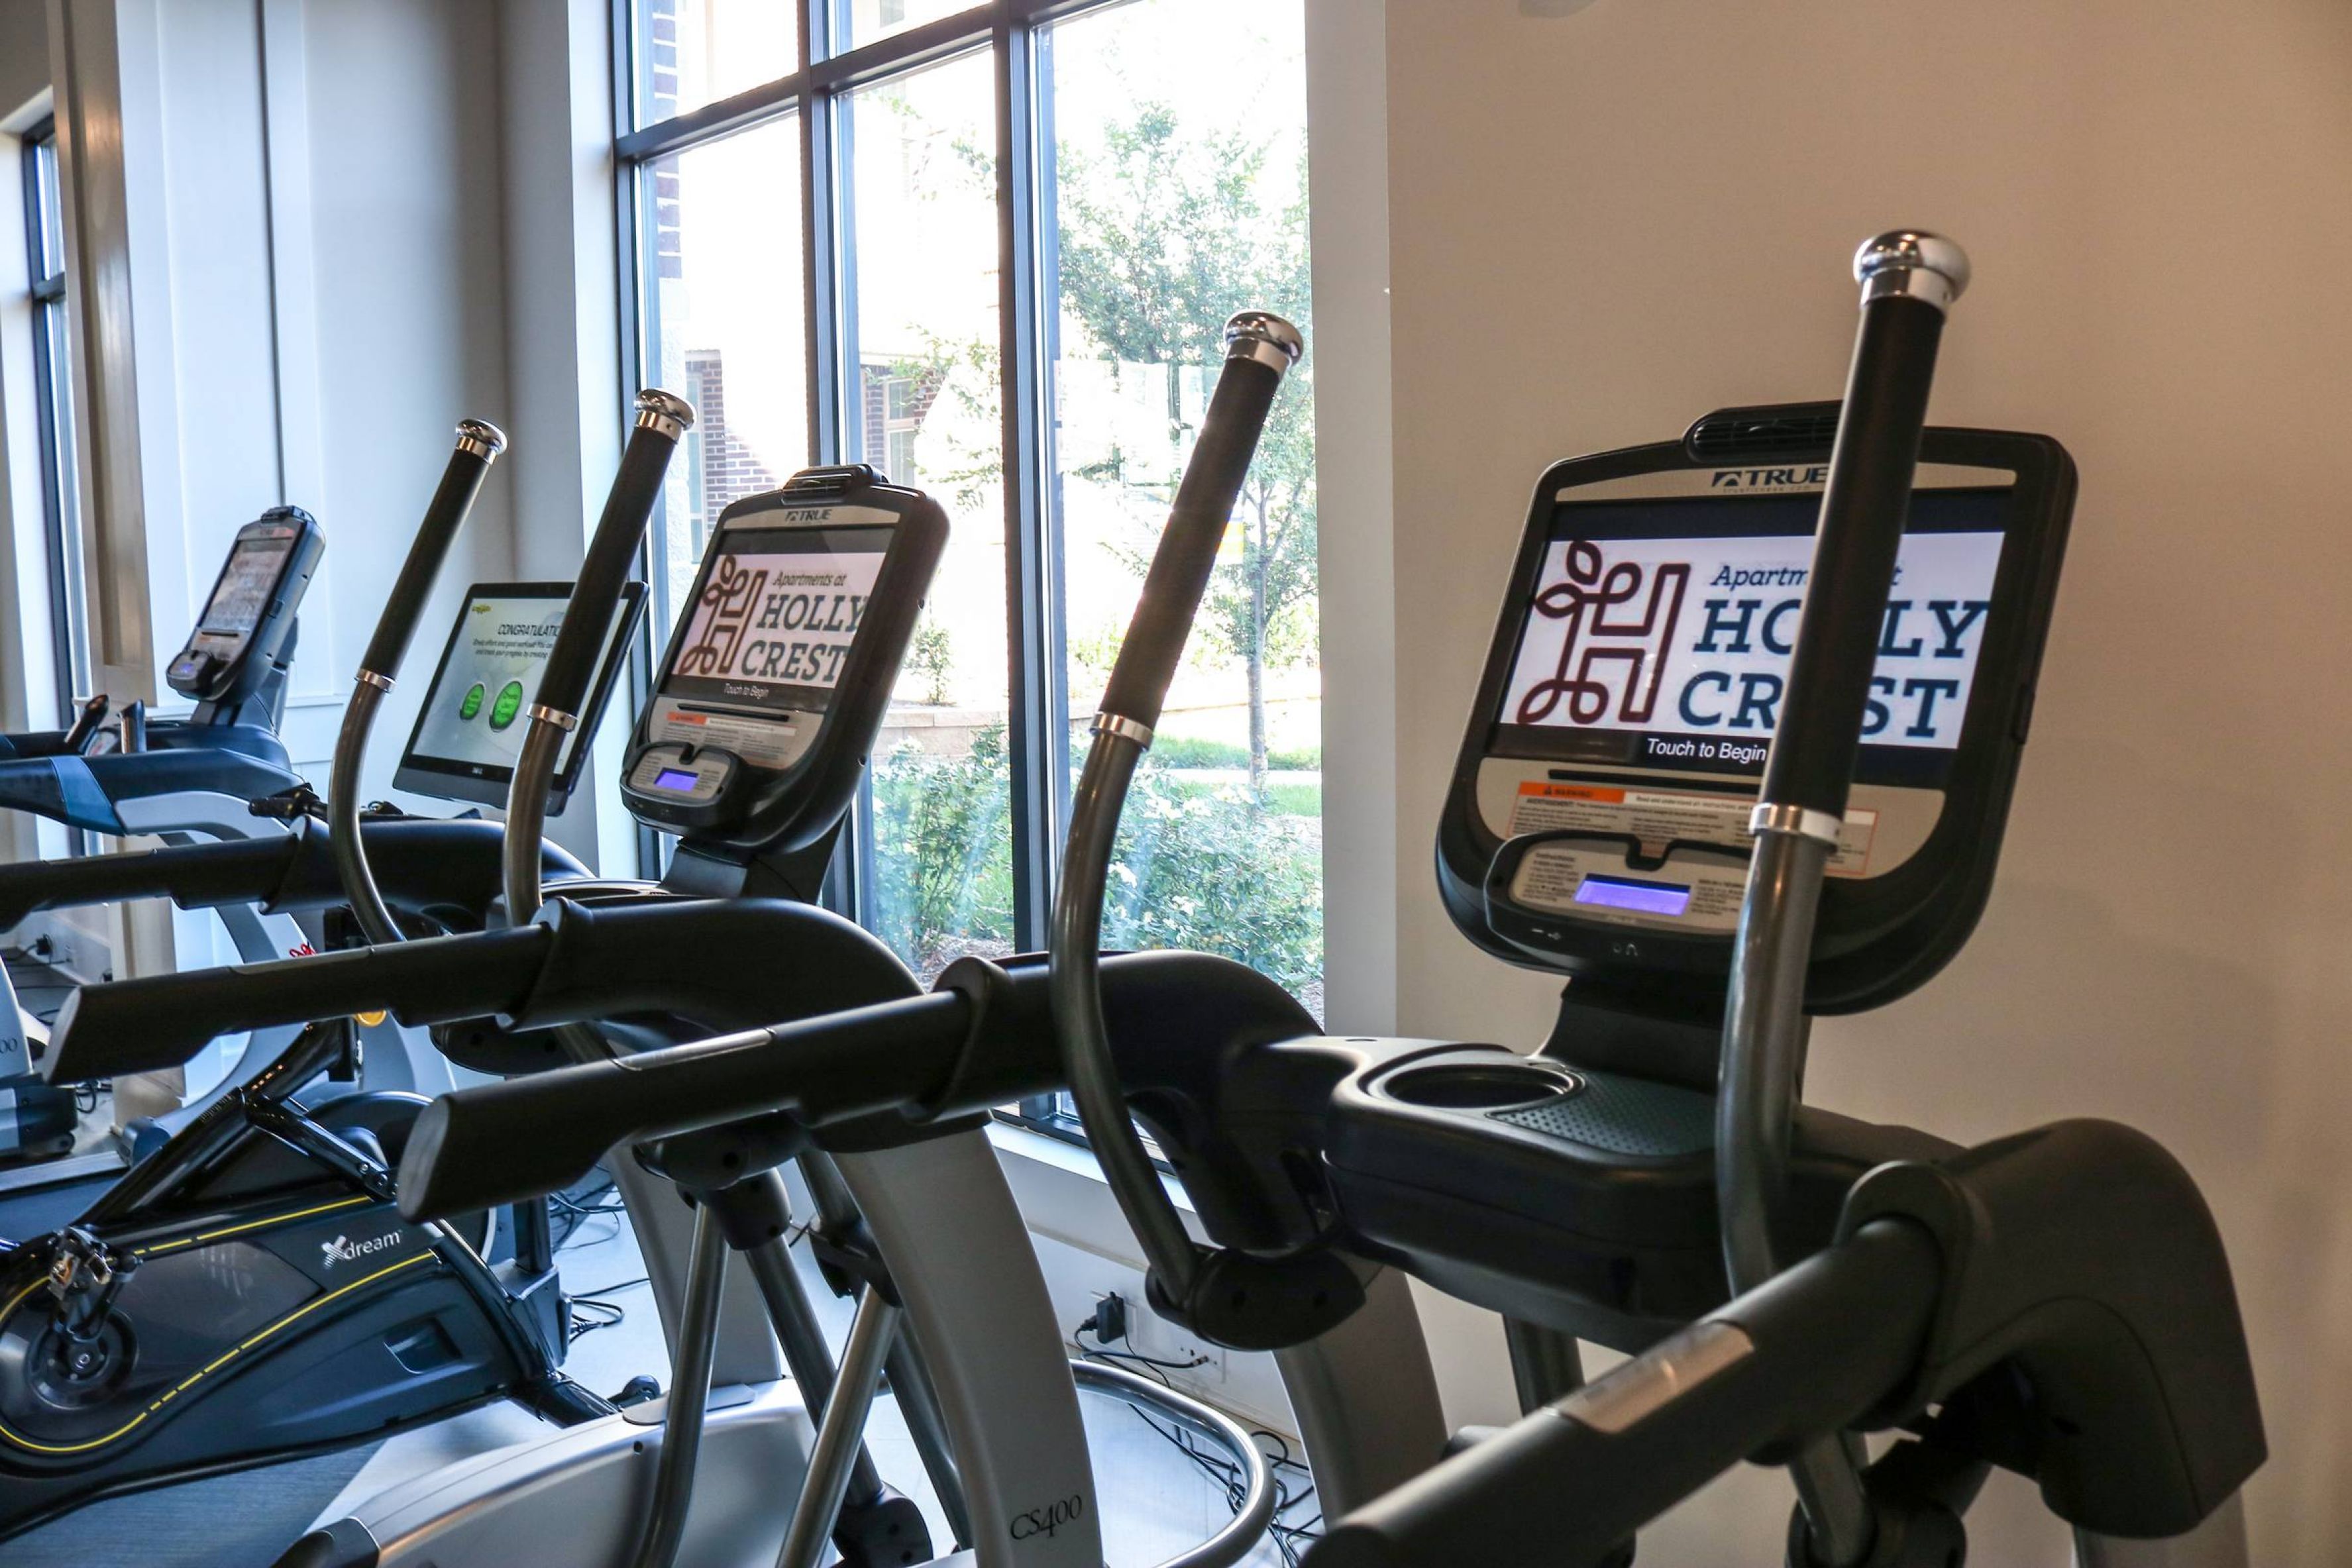 Apartments at holly crest fitness center amenity with cardio equipment